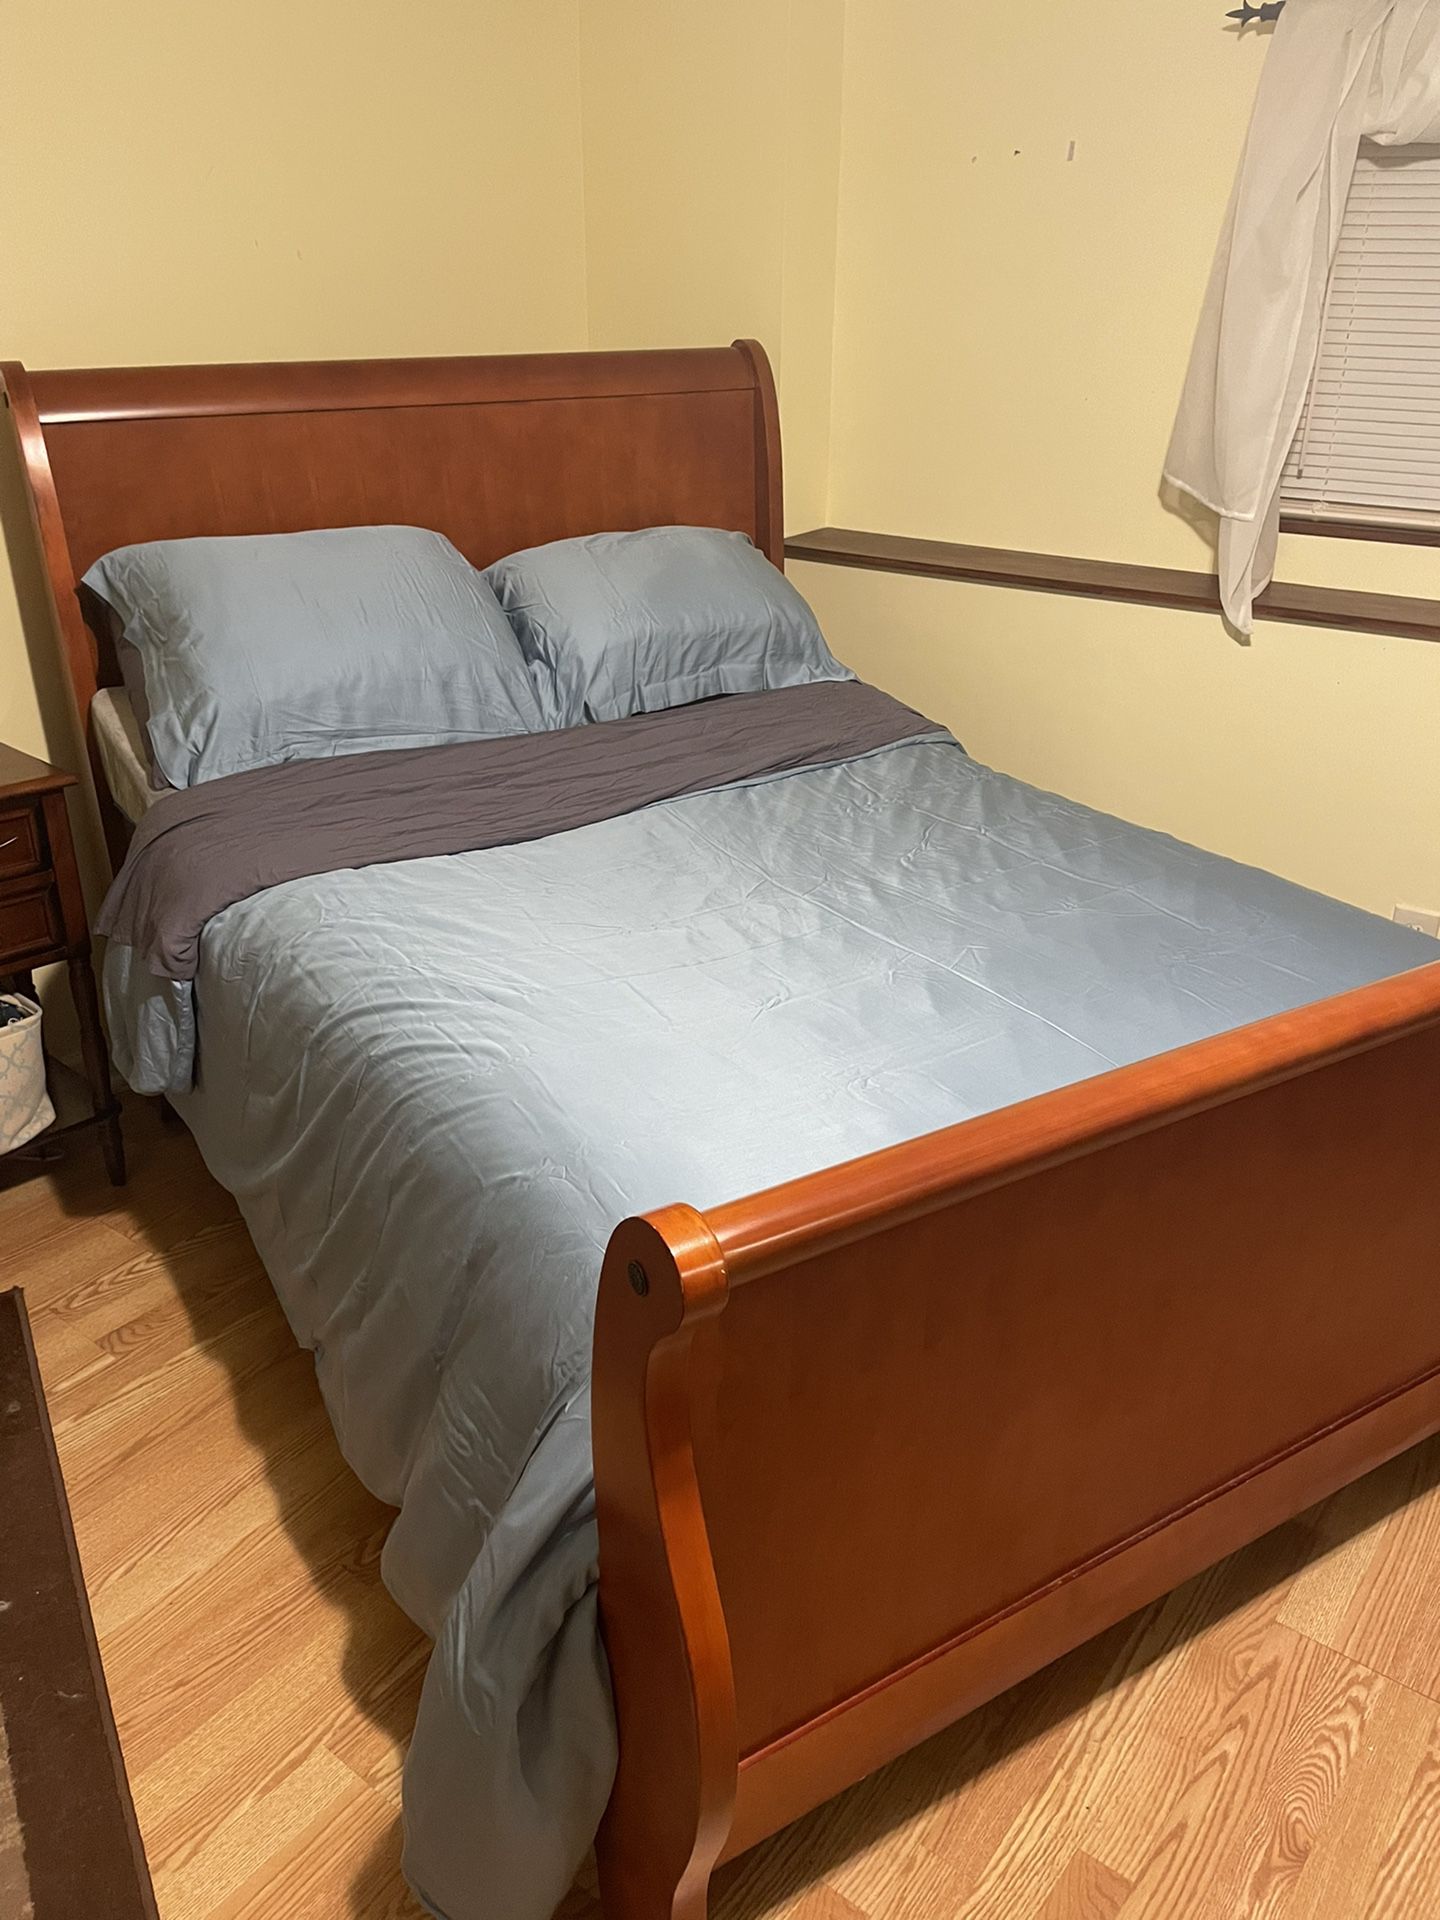 Sale Pending -Full Size Sleigh Bed And Dresser! 